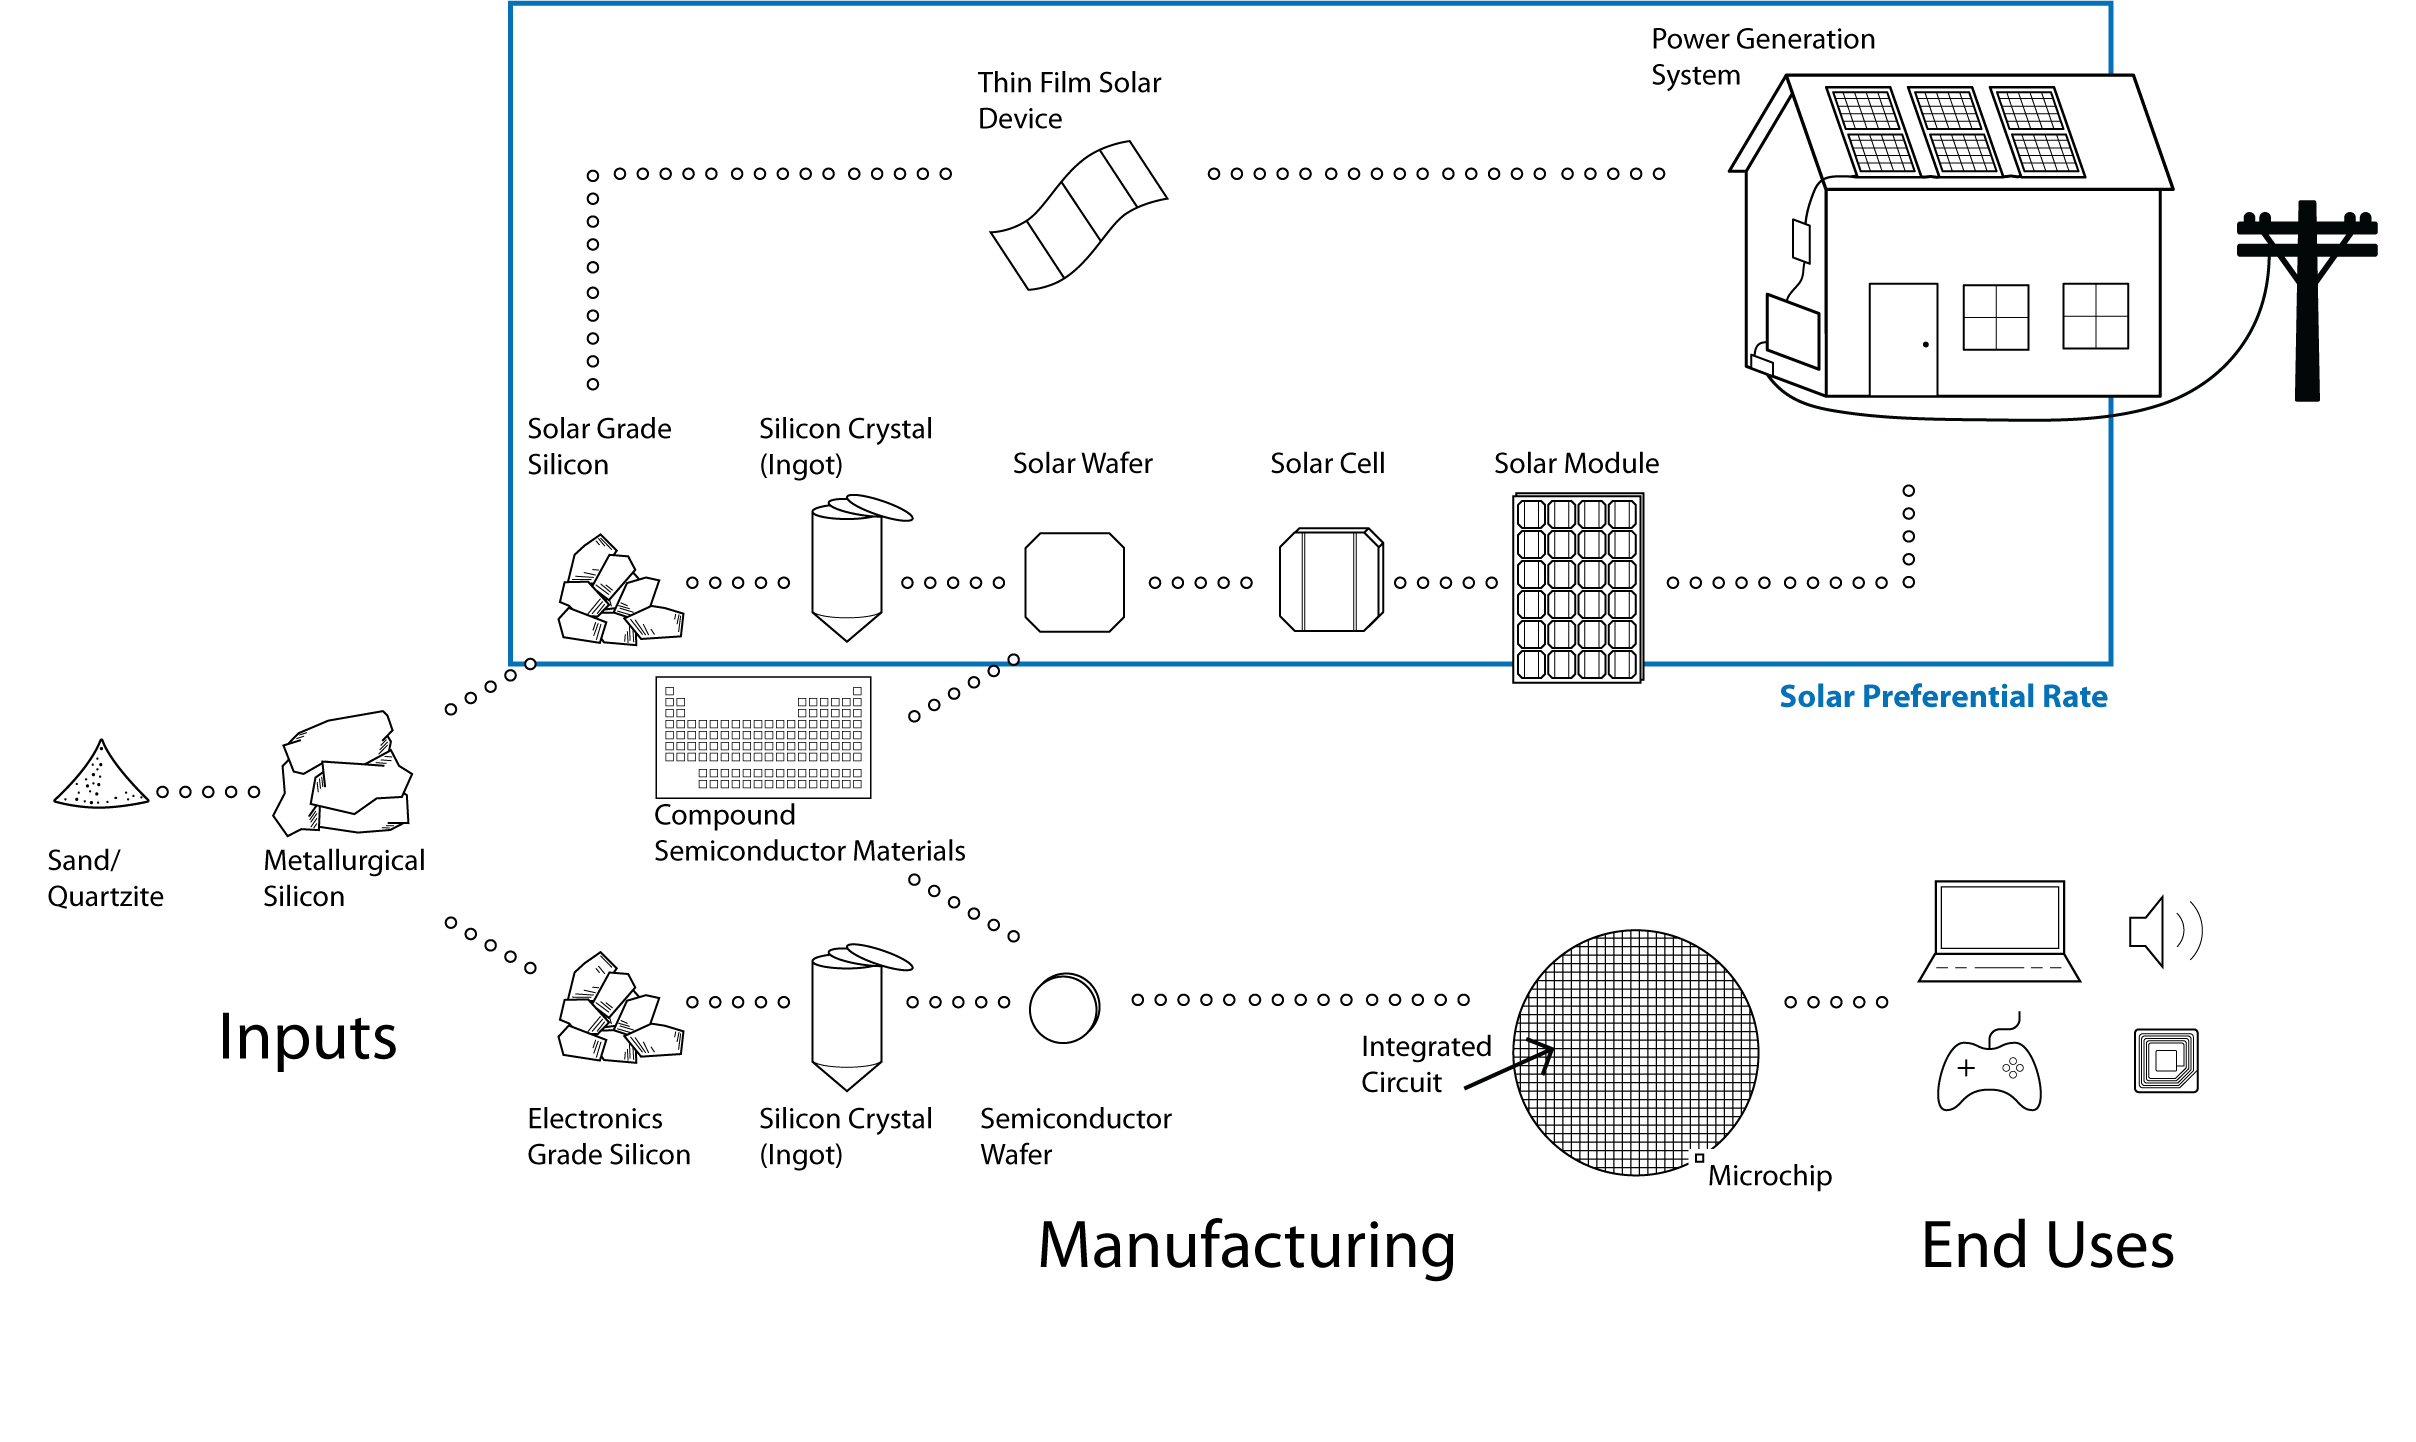 Flow chart shows some of the steps in the solar energy system manufacturing process, with a box highlighting activities that qualify for the preferential B&O tax rate.